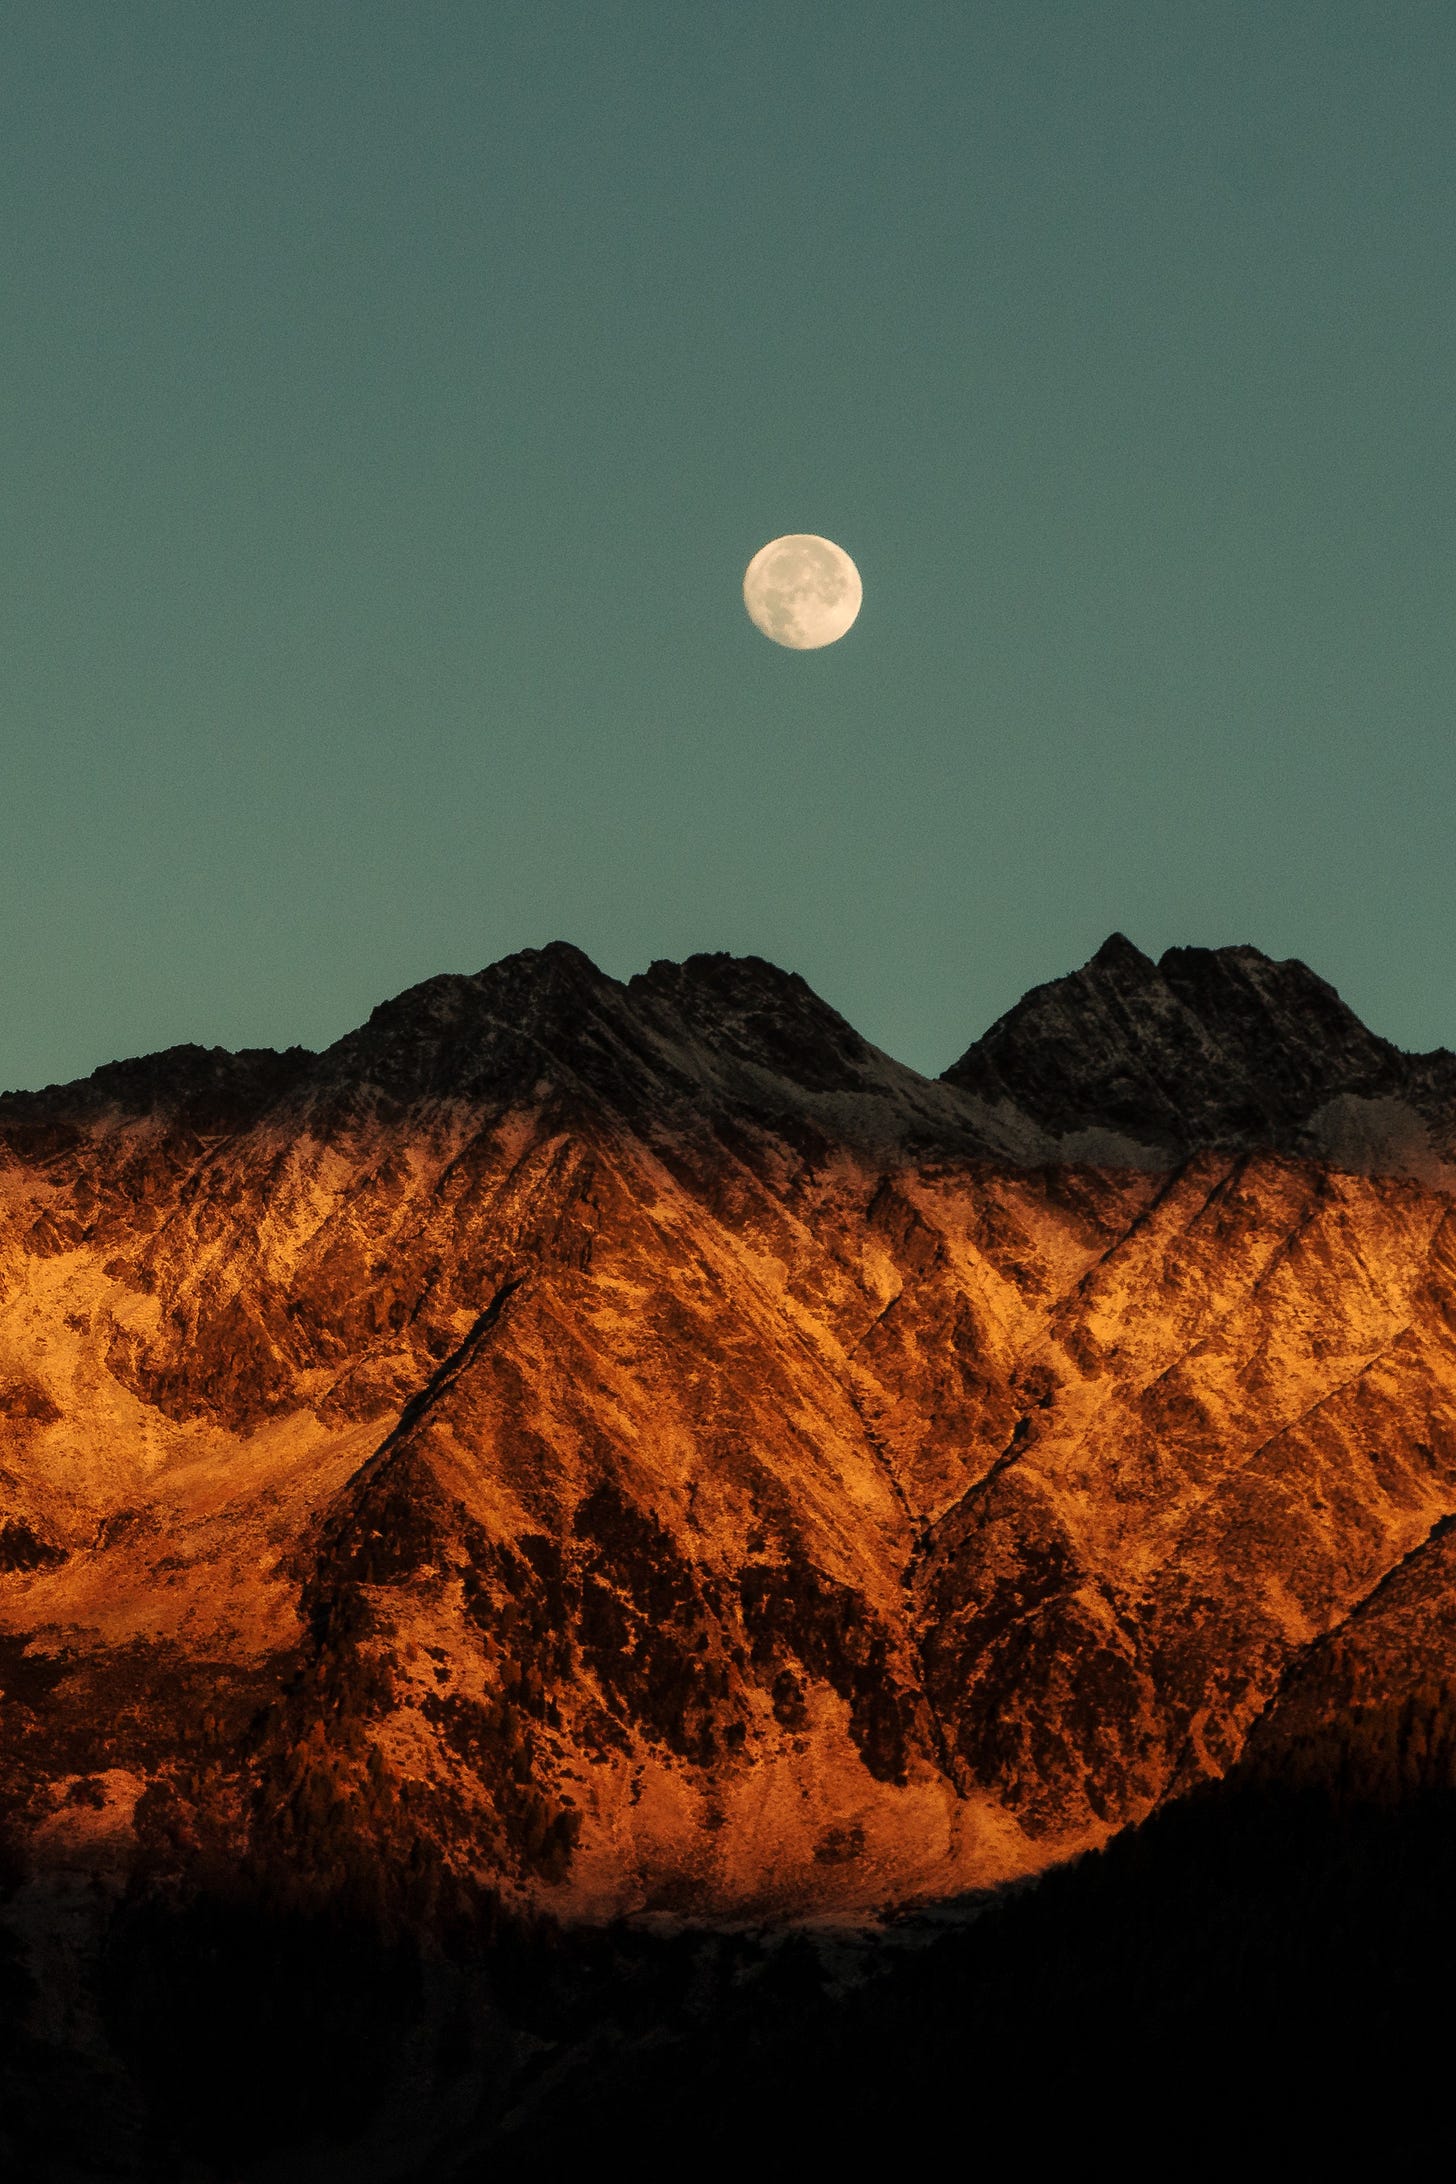 Full moon visible by day over mountains